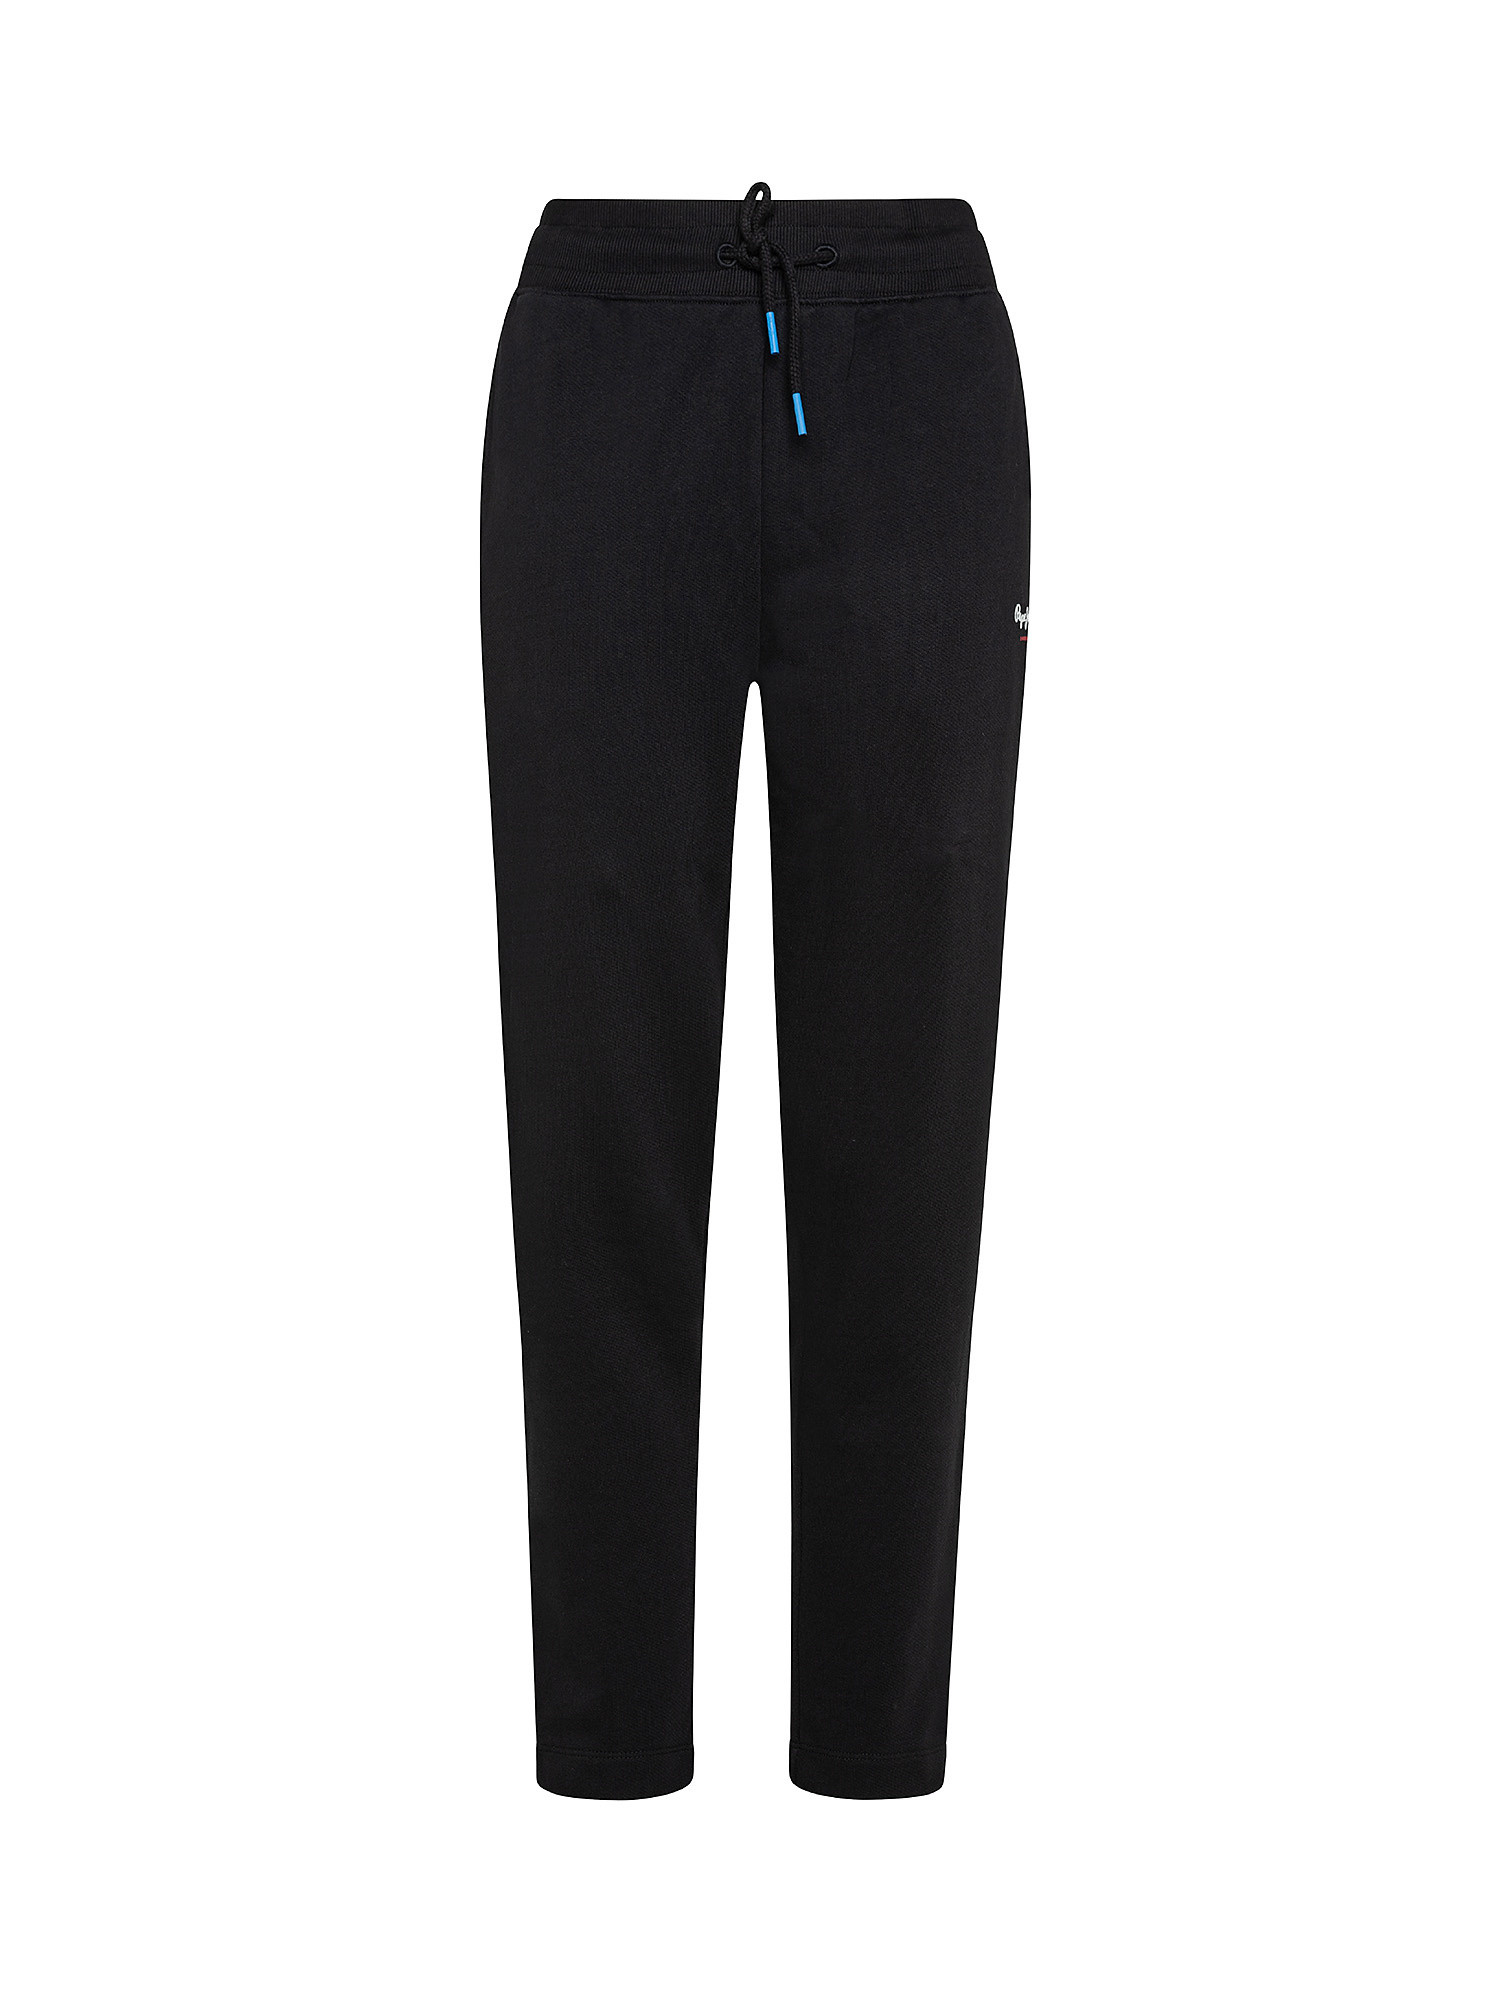 Calista joggers trousers, Black, large image number 0